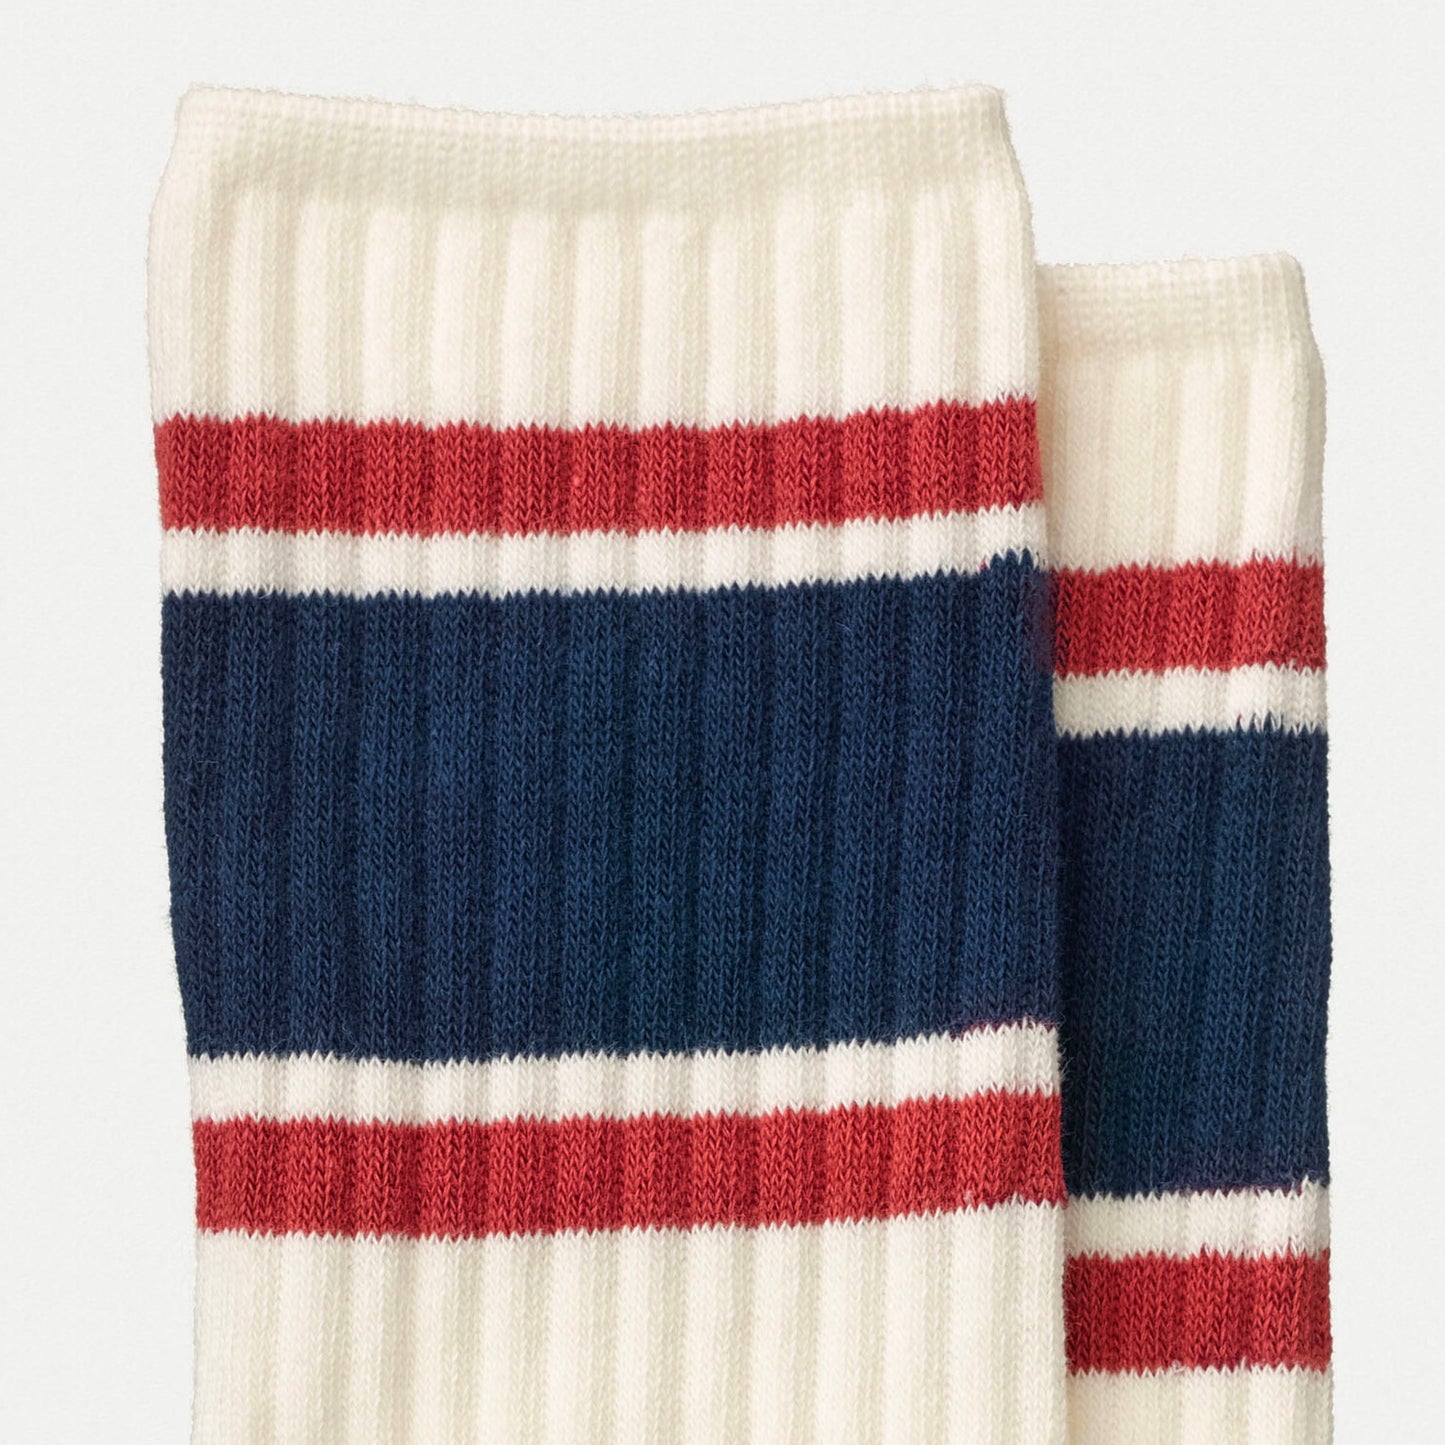 Load image into Gallery viewer, Nudie - Amundsson Sport Socks - Off White / Navy / Red
